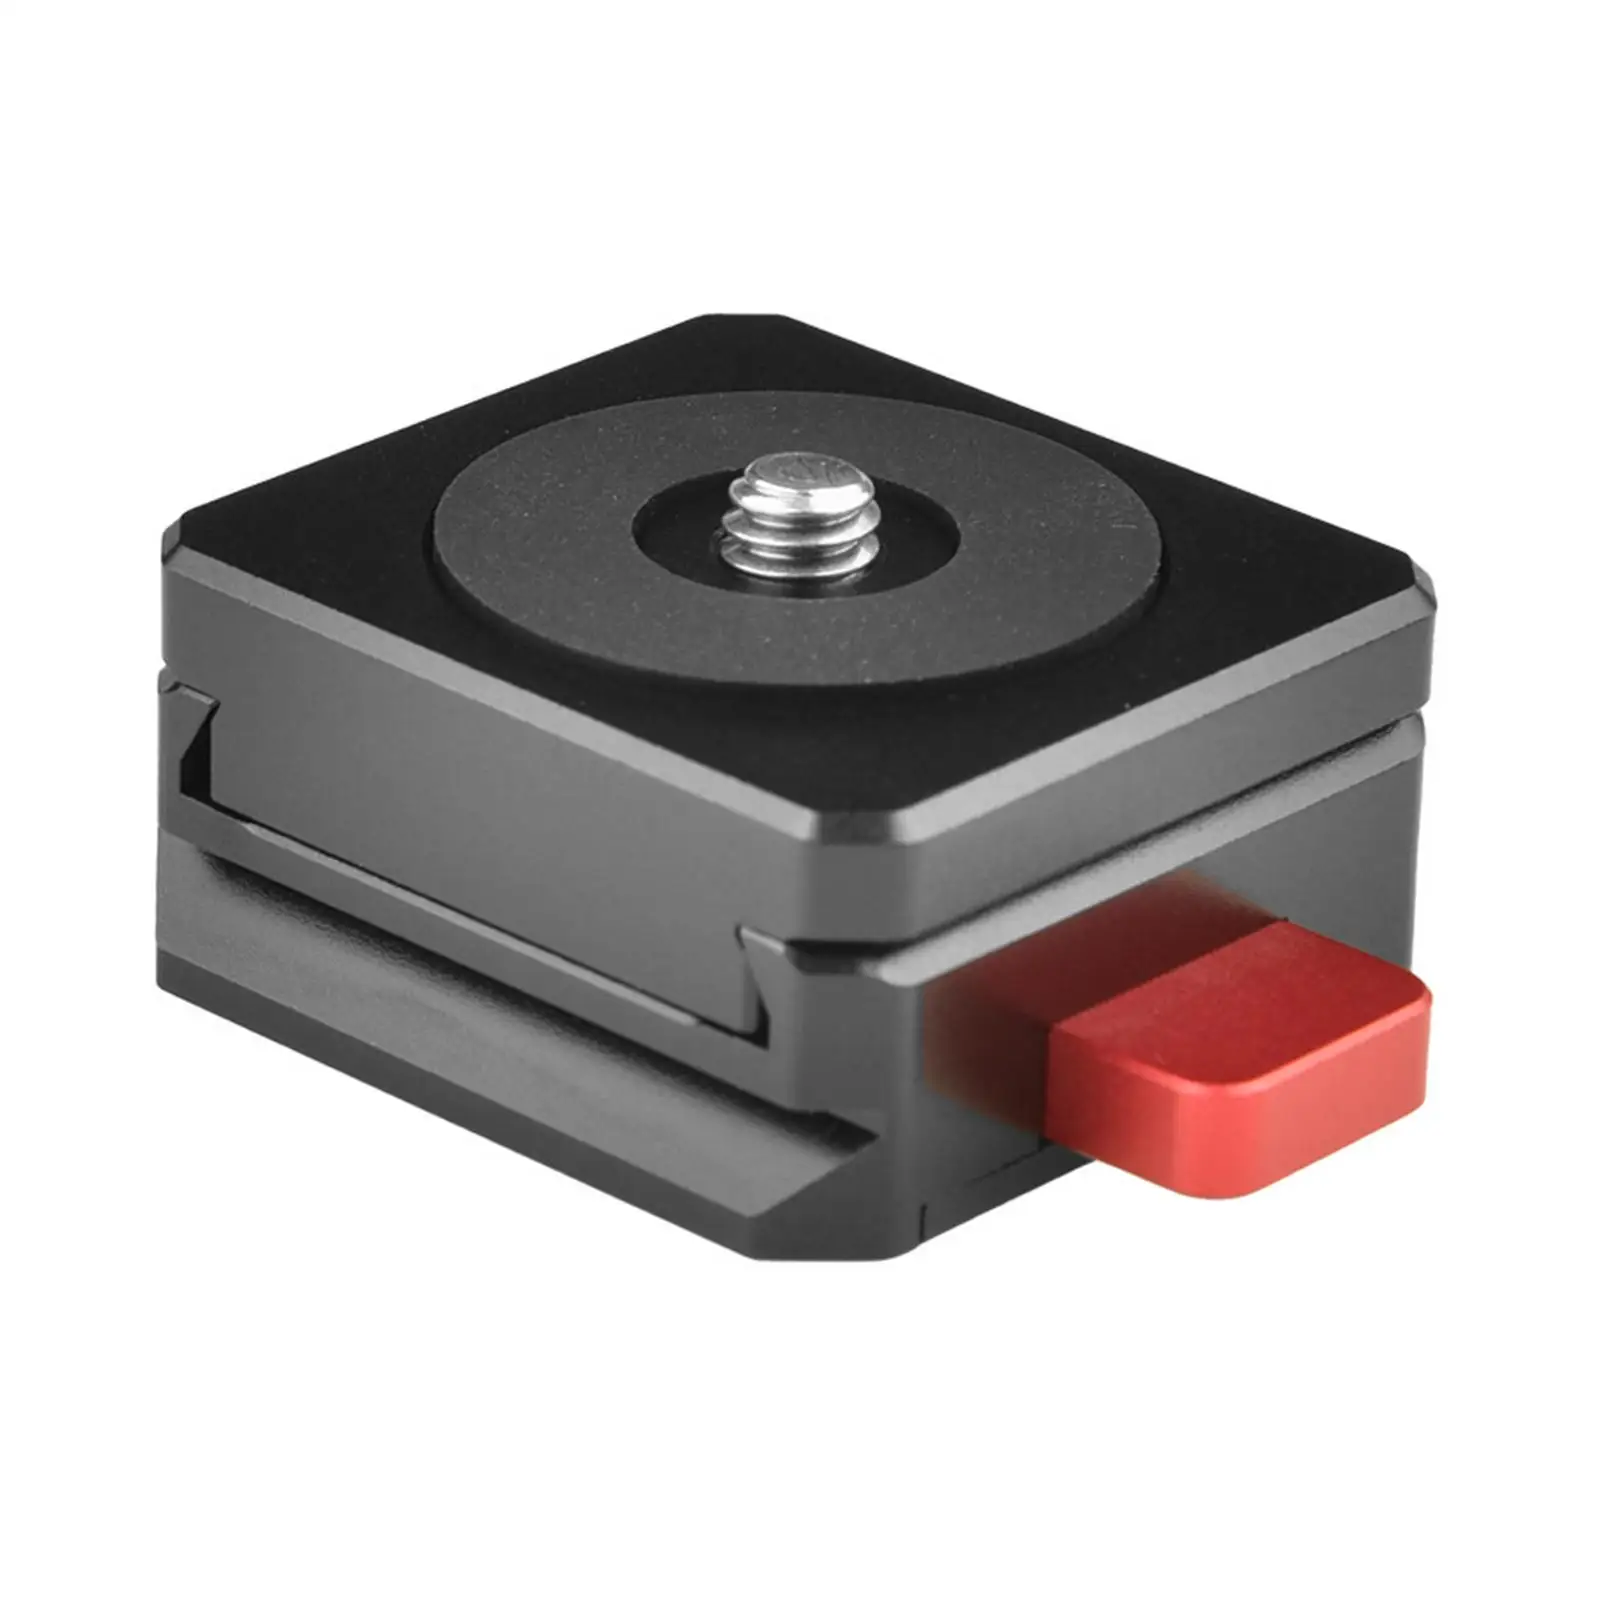 Release Plate Female Dock Male Lock Accessory 1/4inch Screw on The Top Durable for Monitor Mount Multipurpose